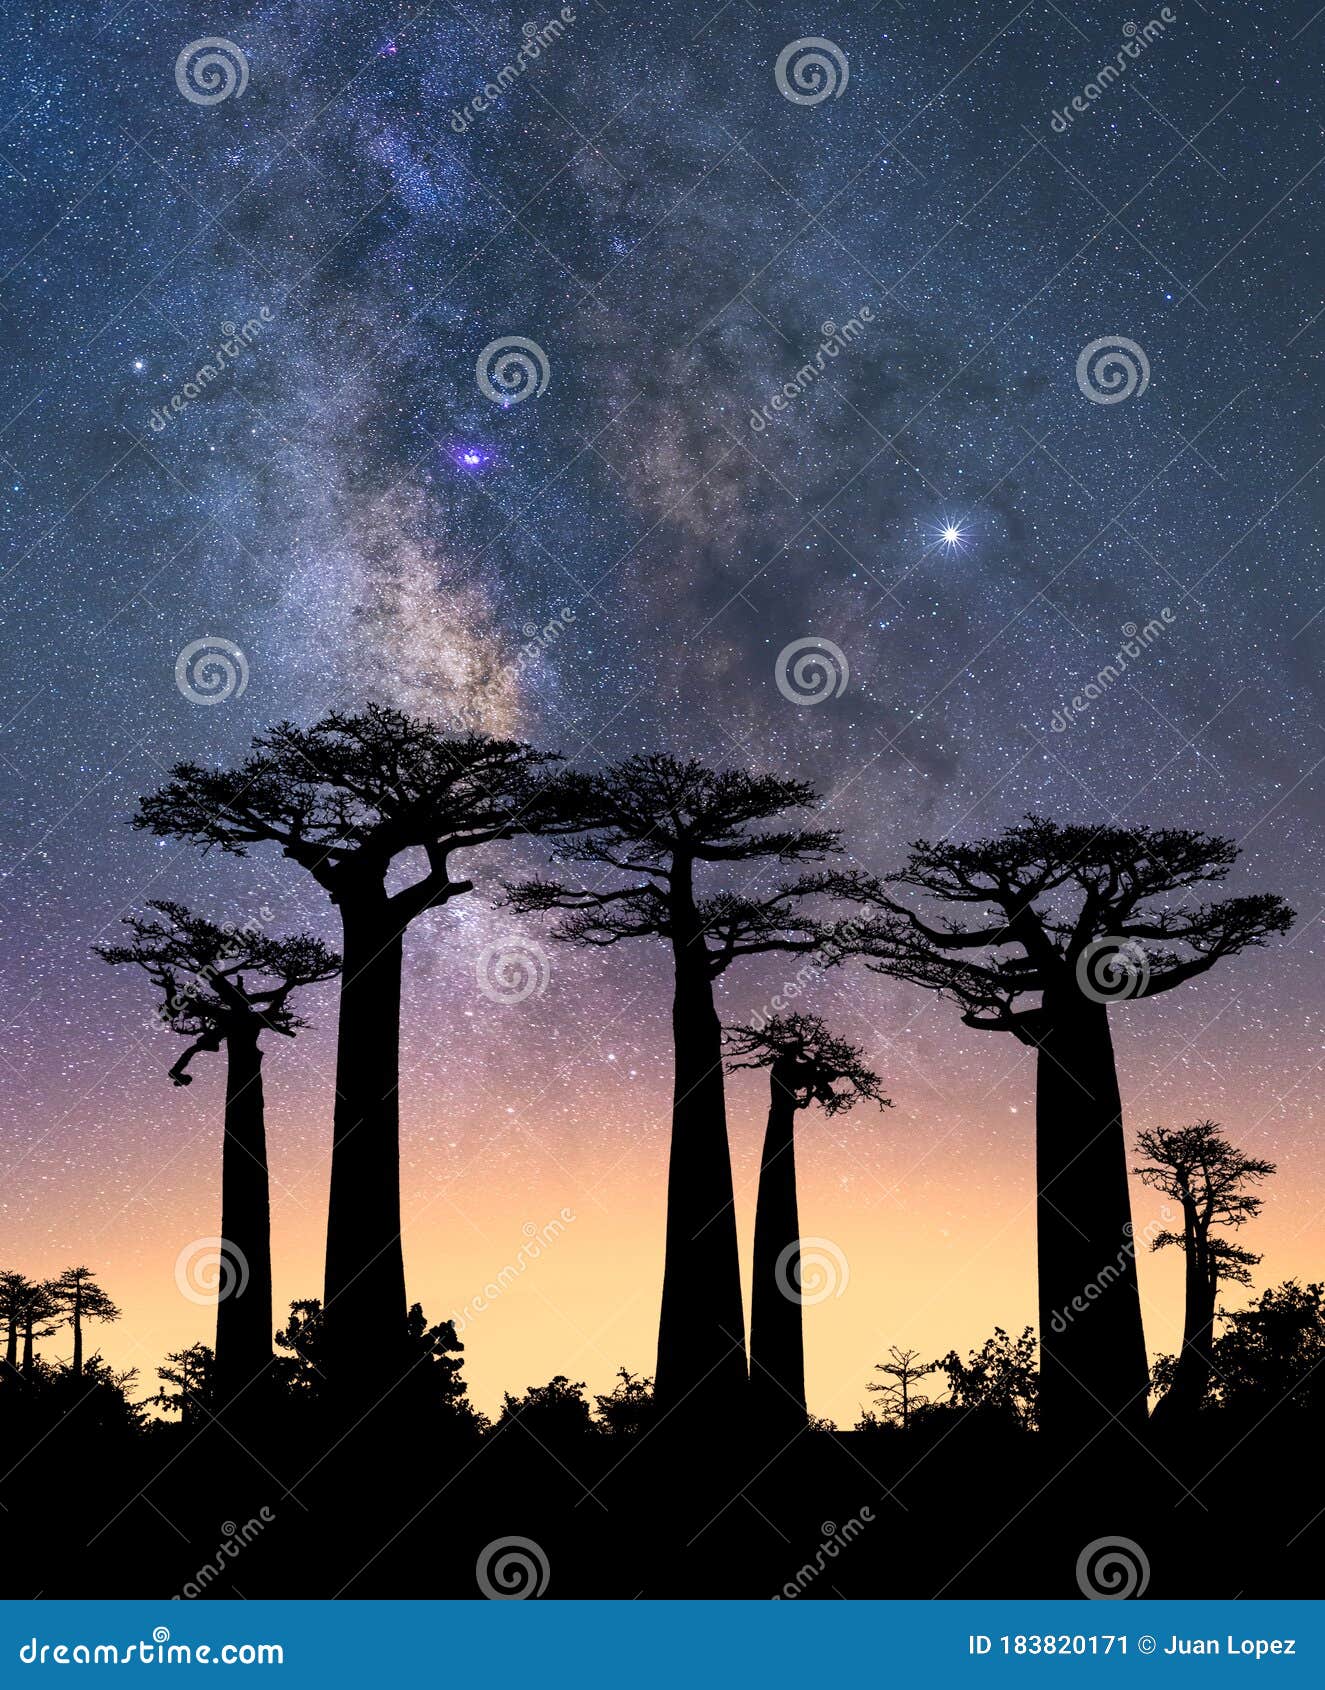 typical trees of madagascar known as adansonia, baobab, bottle tree or monkey bread with a night sky in the background